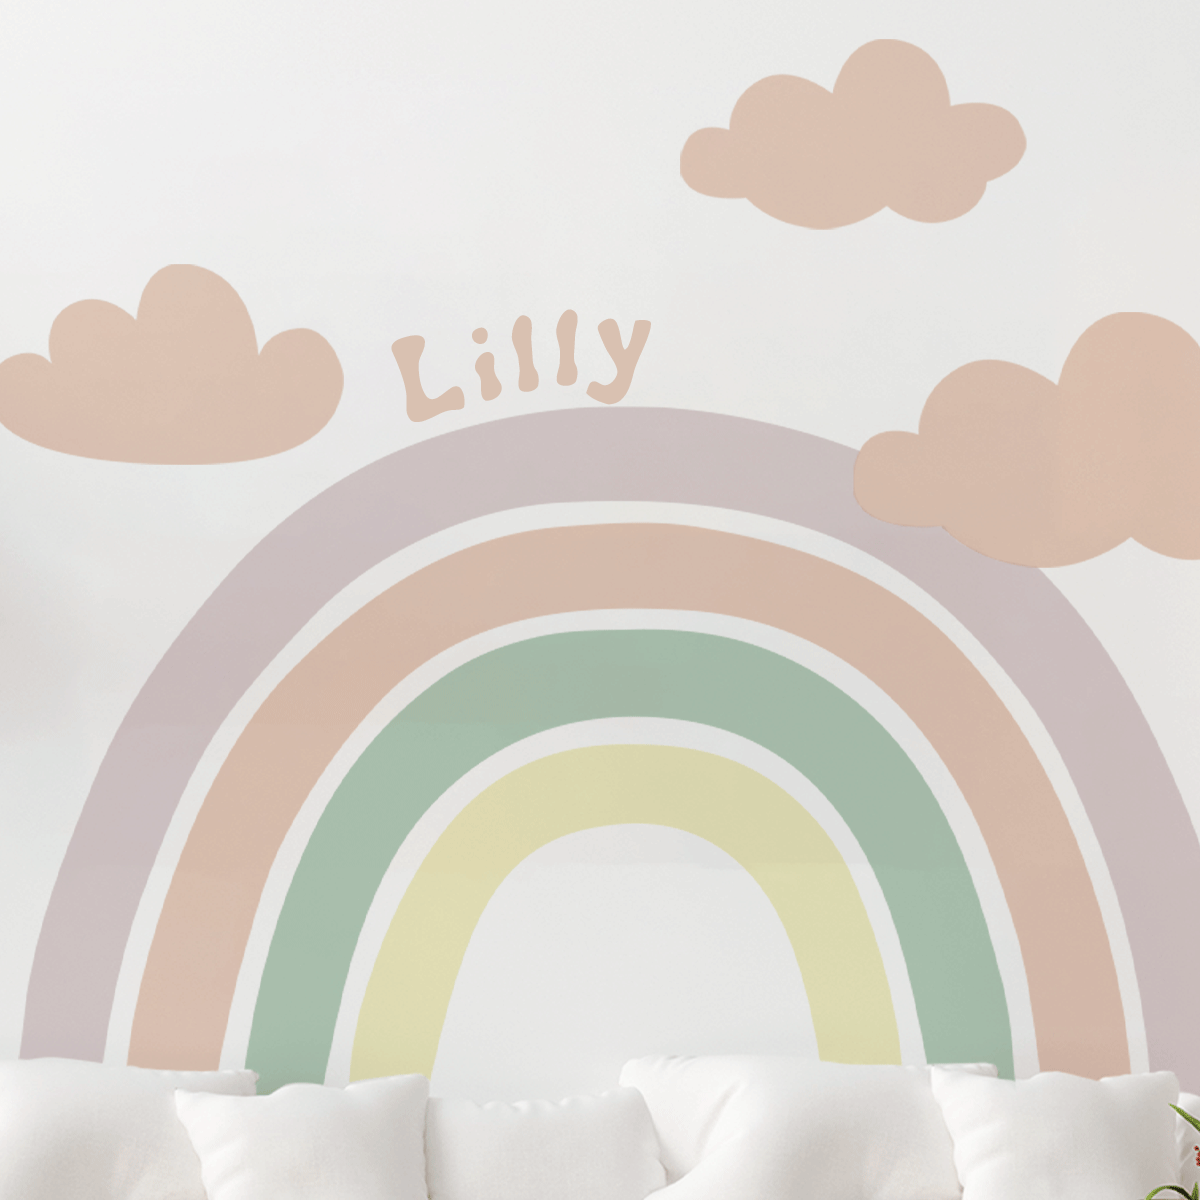 A personalised print or wall sticker adds a special magic. – MICA-MICA